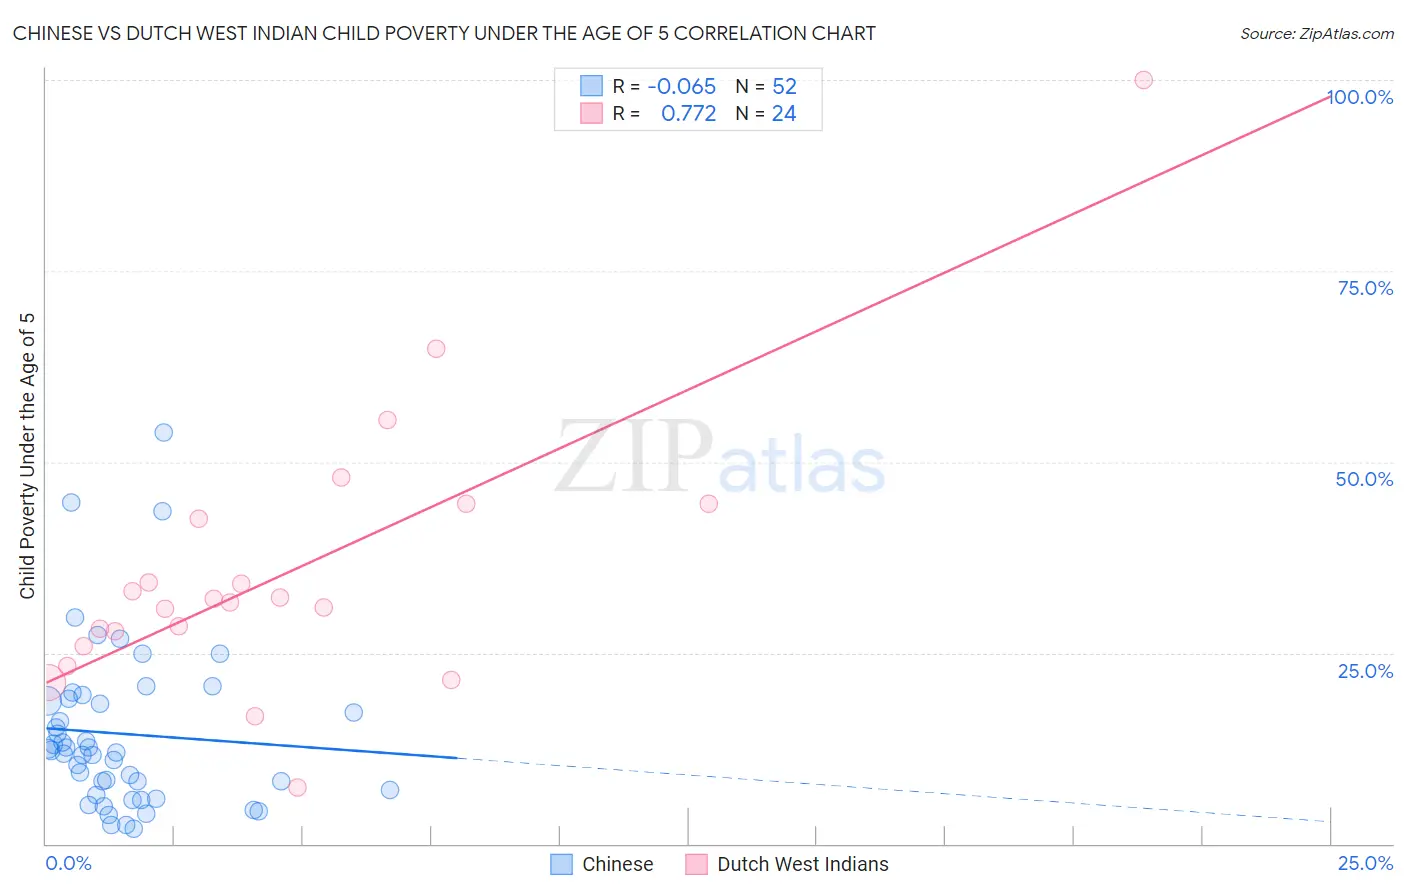 Chinese vs Dutch West Indian Child Poverty Under the Age of 5